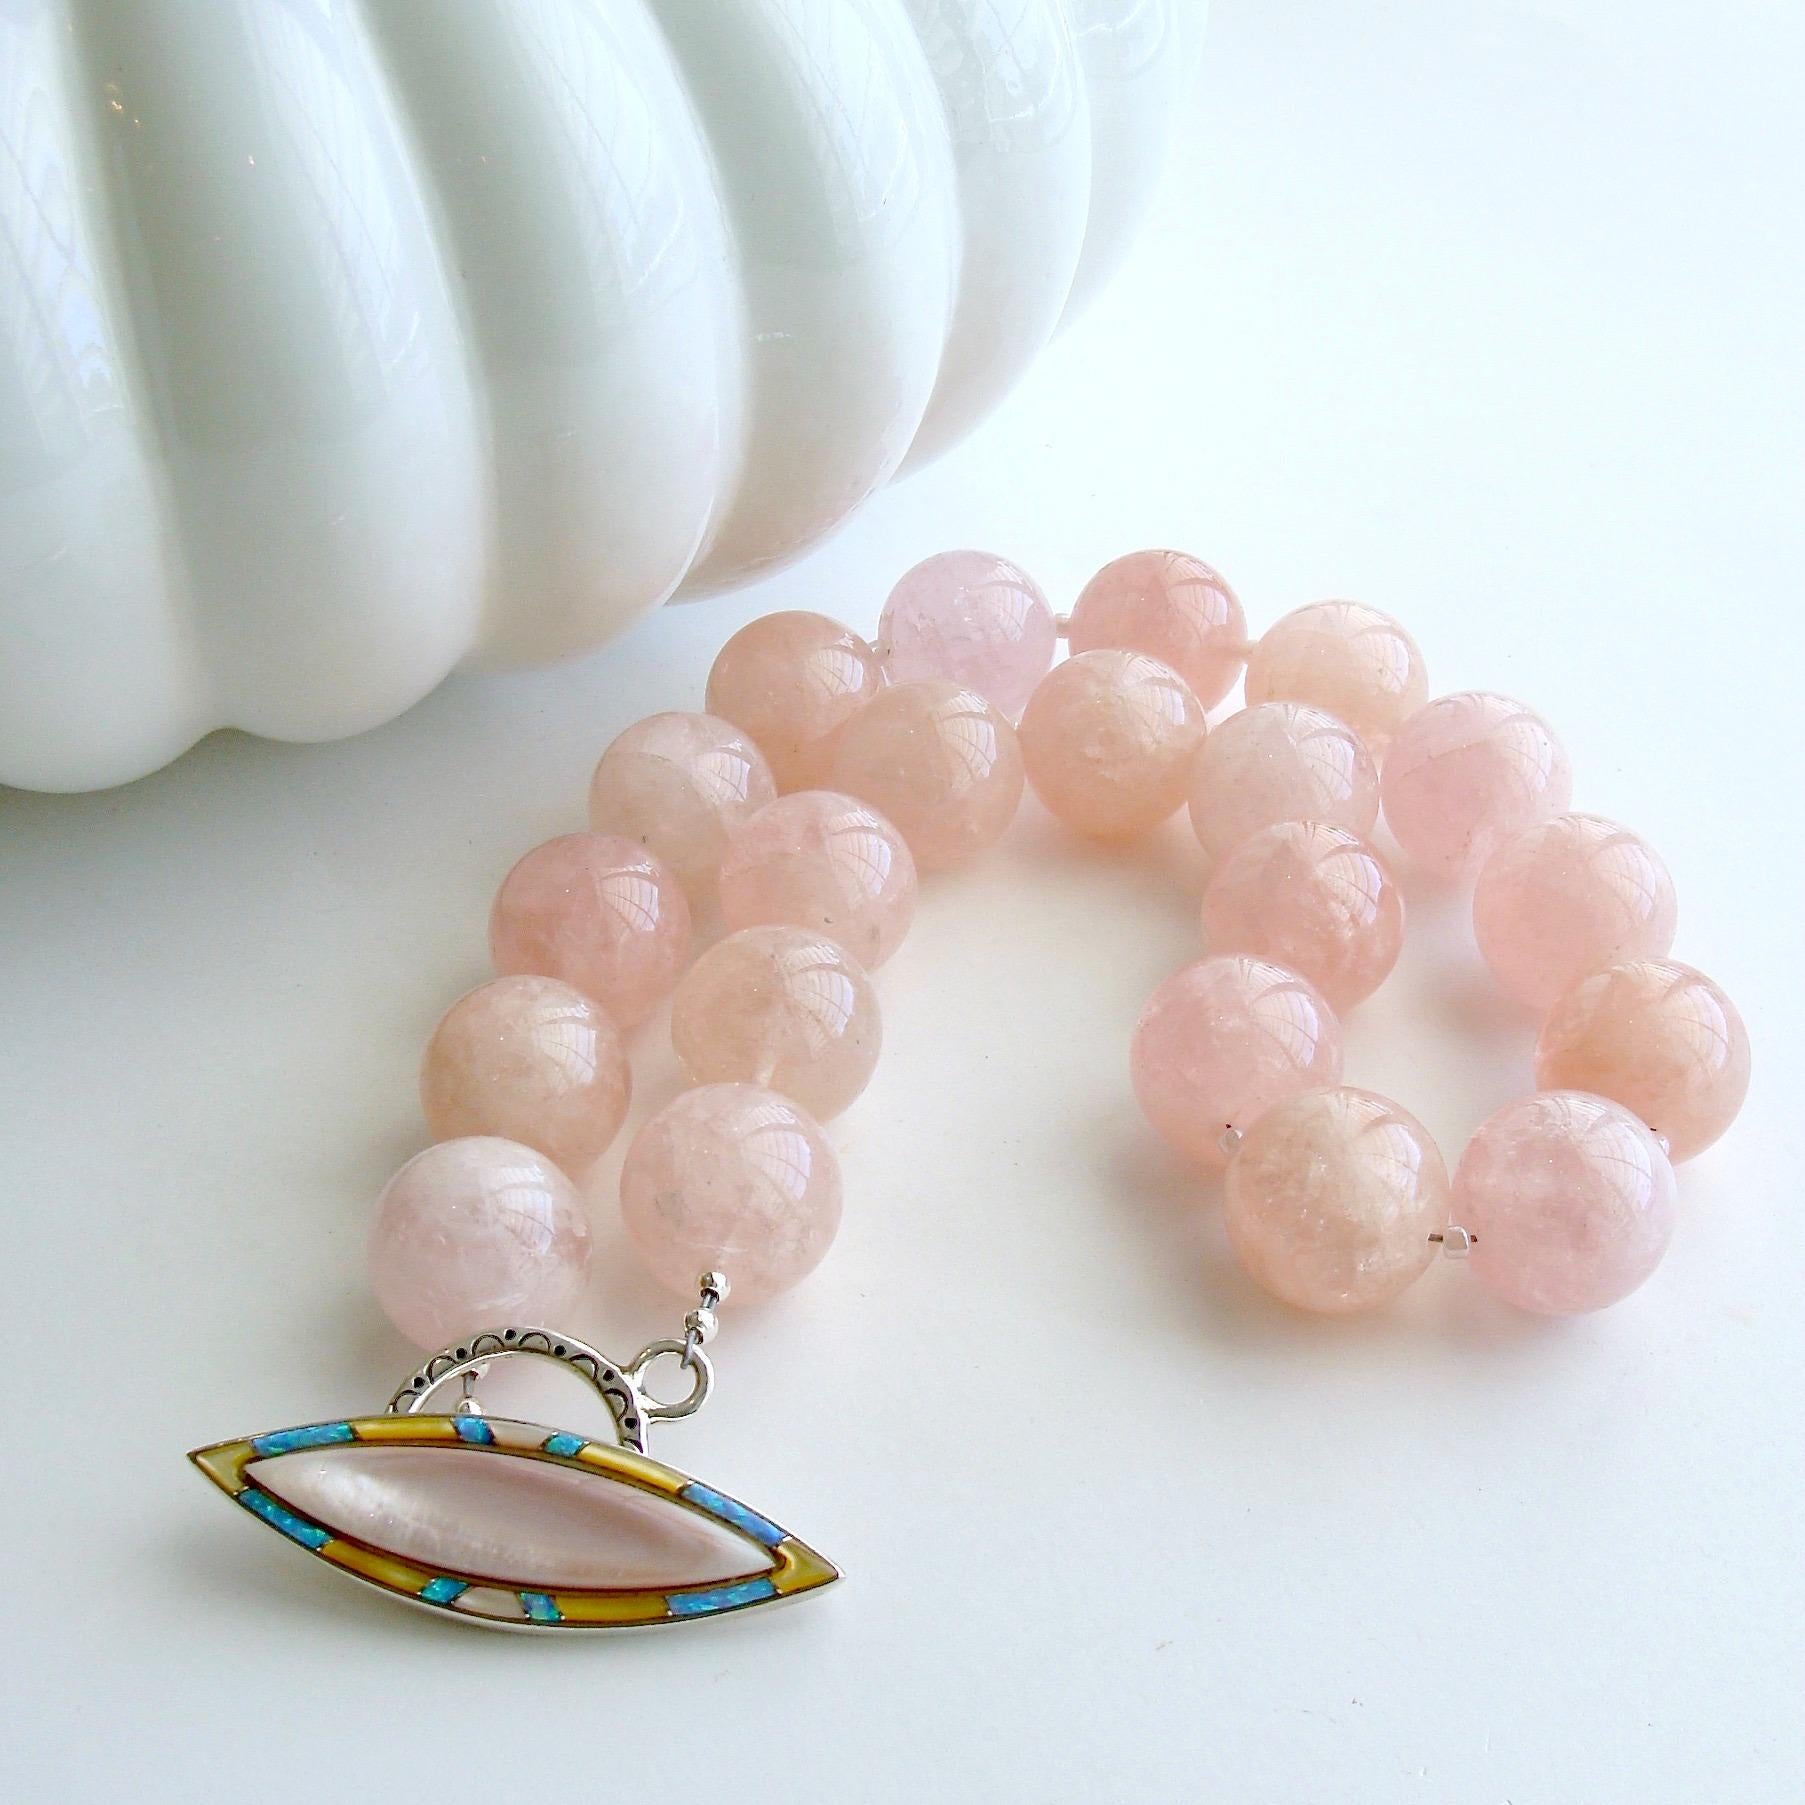 Varying shades of blush pink and pink grapefruit colored luxe morganite beryl beads are gently separated, creating a bountiful statement choker necklace designed to celebrate spring and summer colors.  The blush pink Peruvian inlay opal toggle can